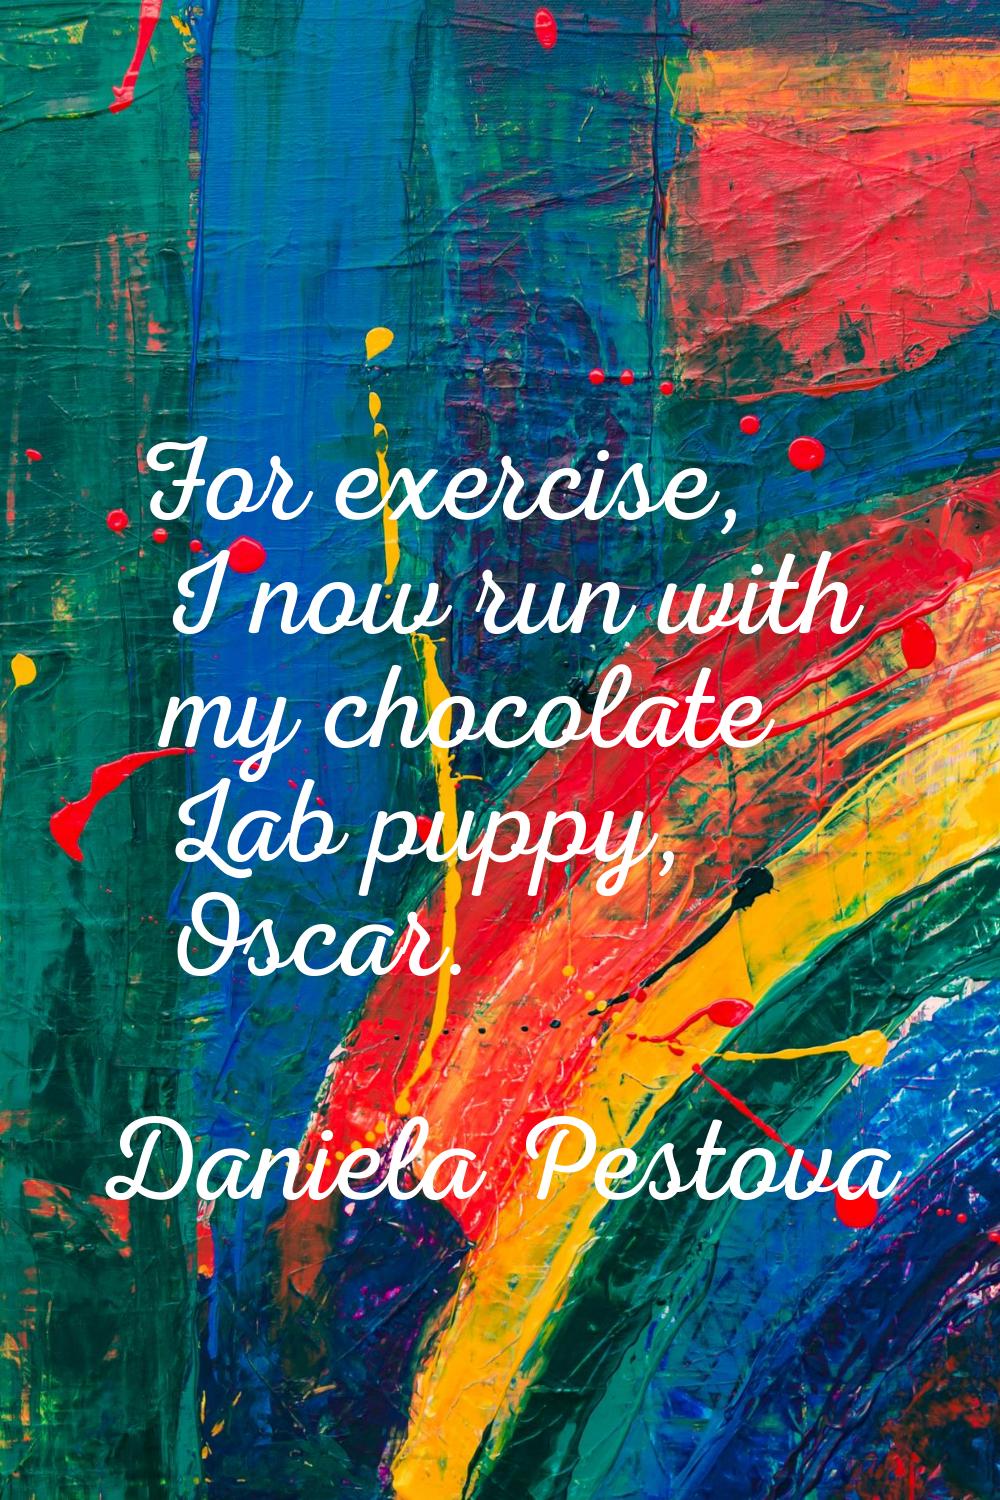 For exercise, I now run with my chocolate Lab puppy, Oscar.